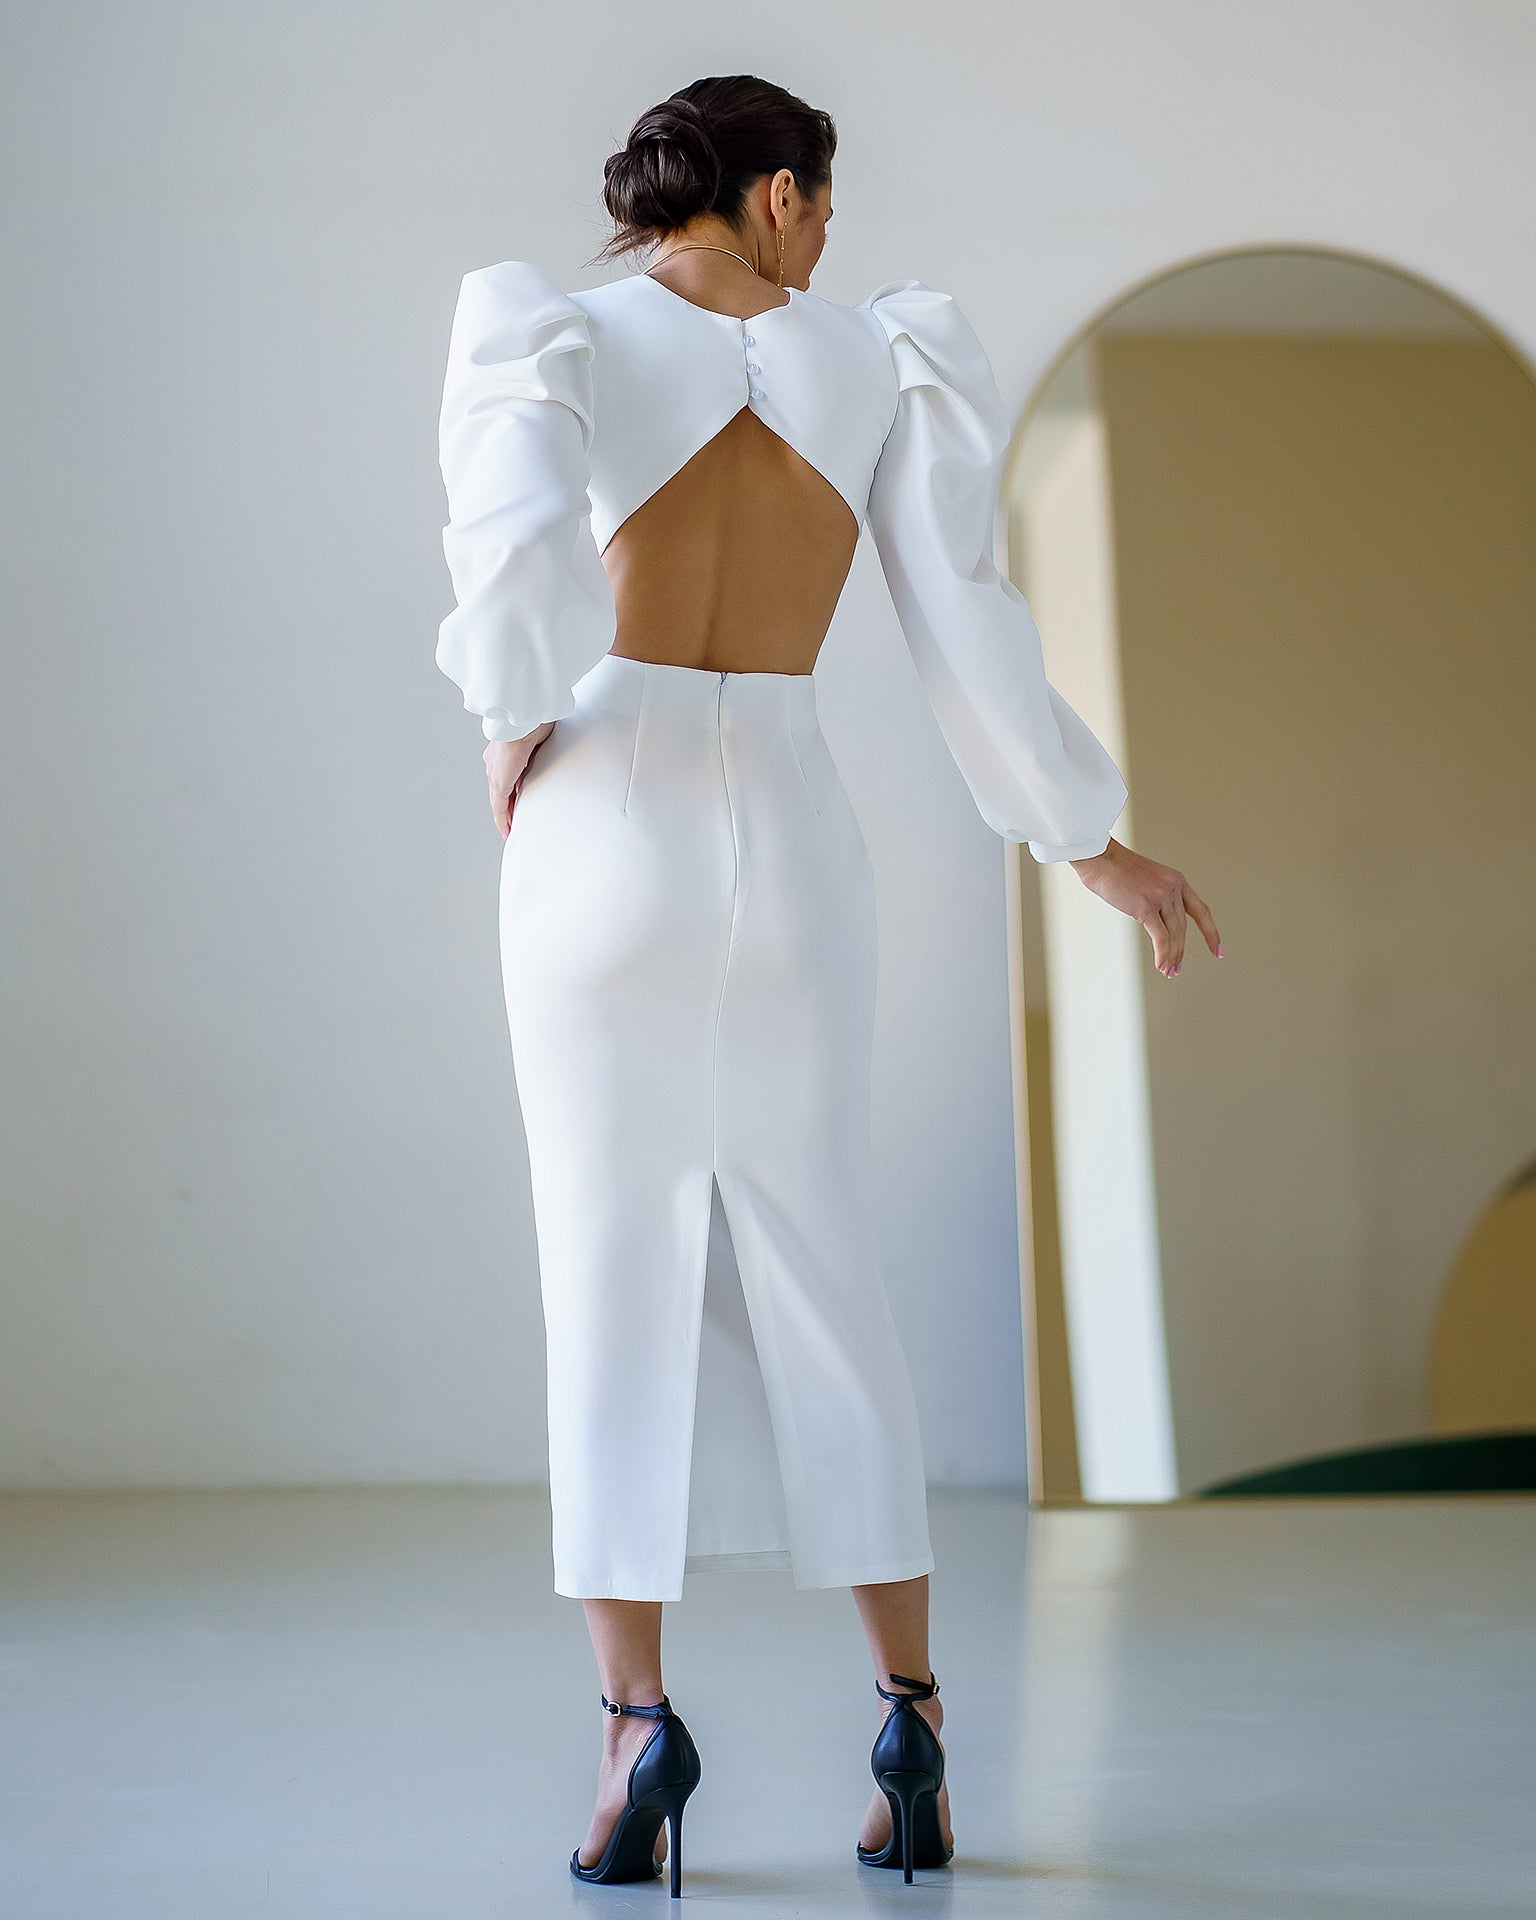 White Backless Cut-Out Puff-Sleeve Midi Dress